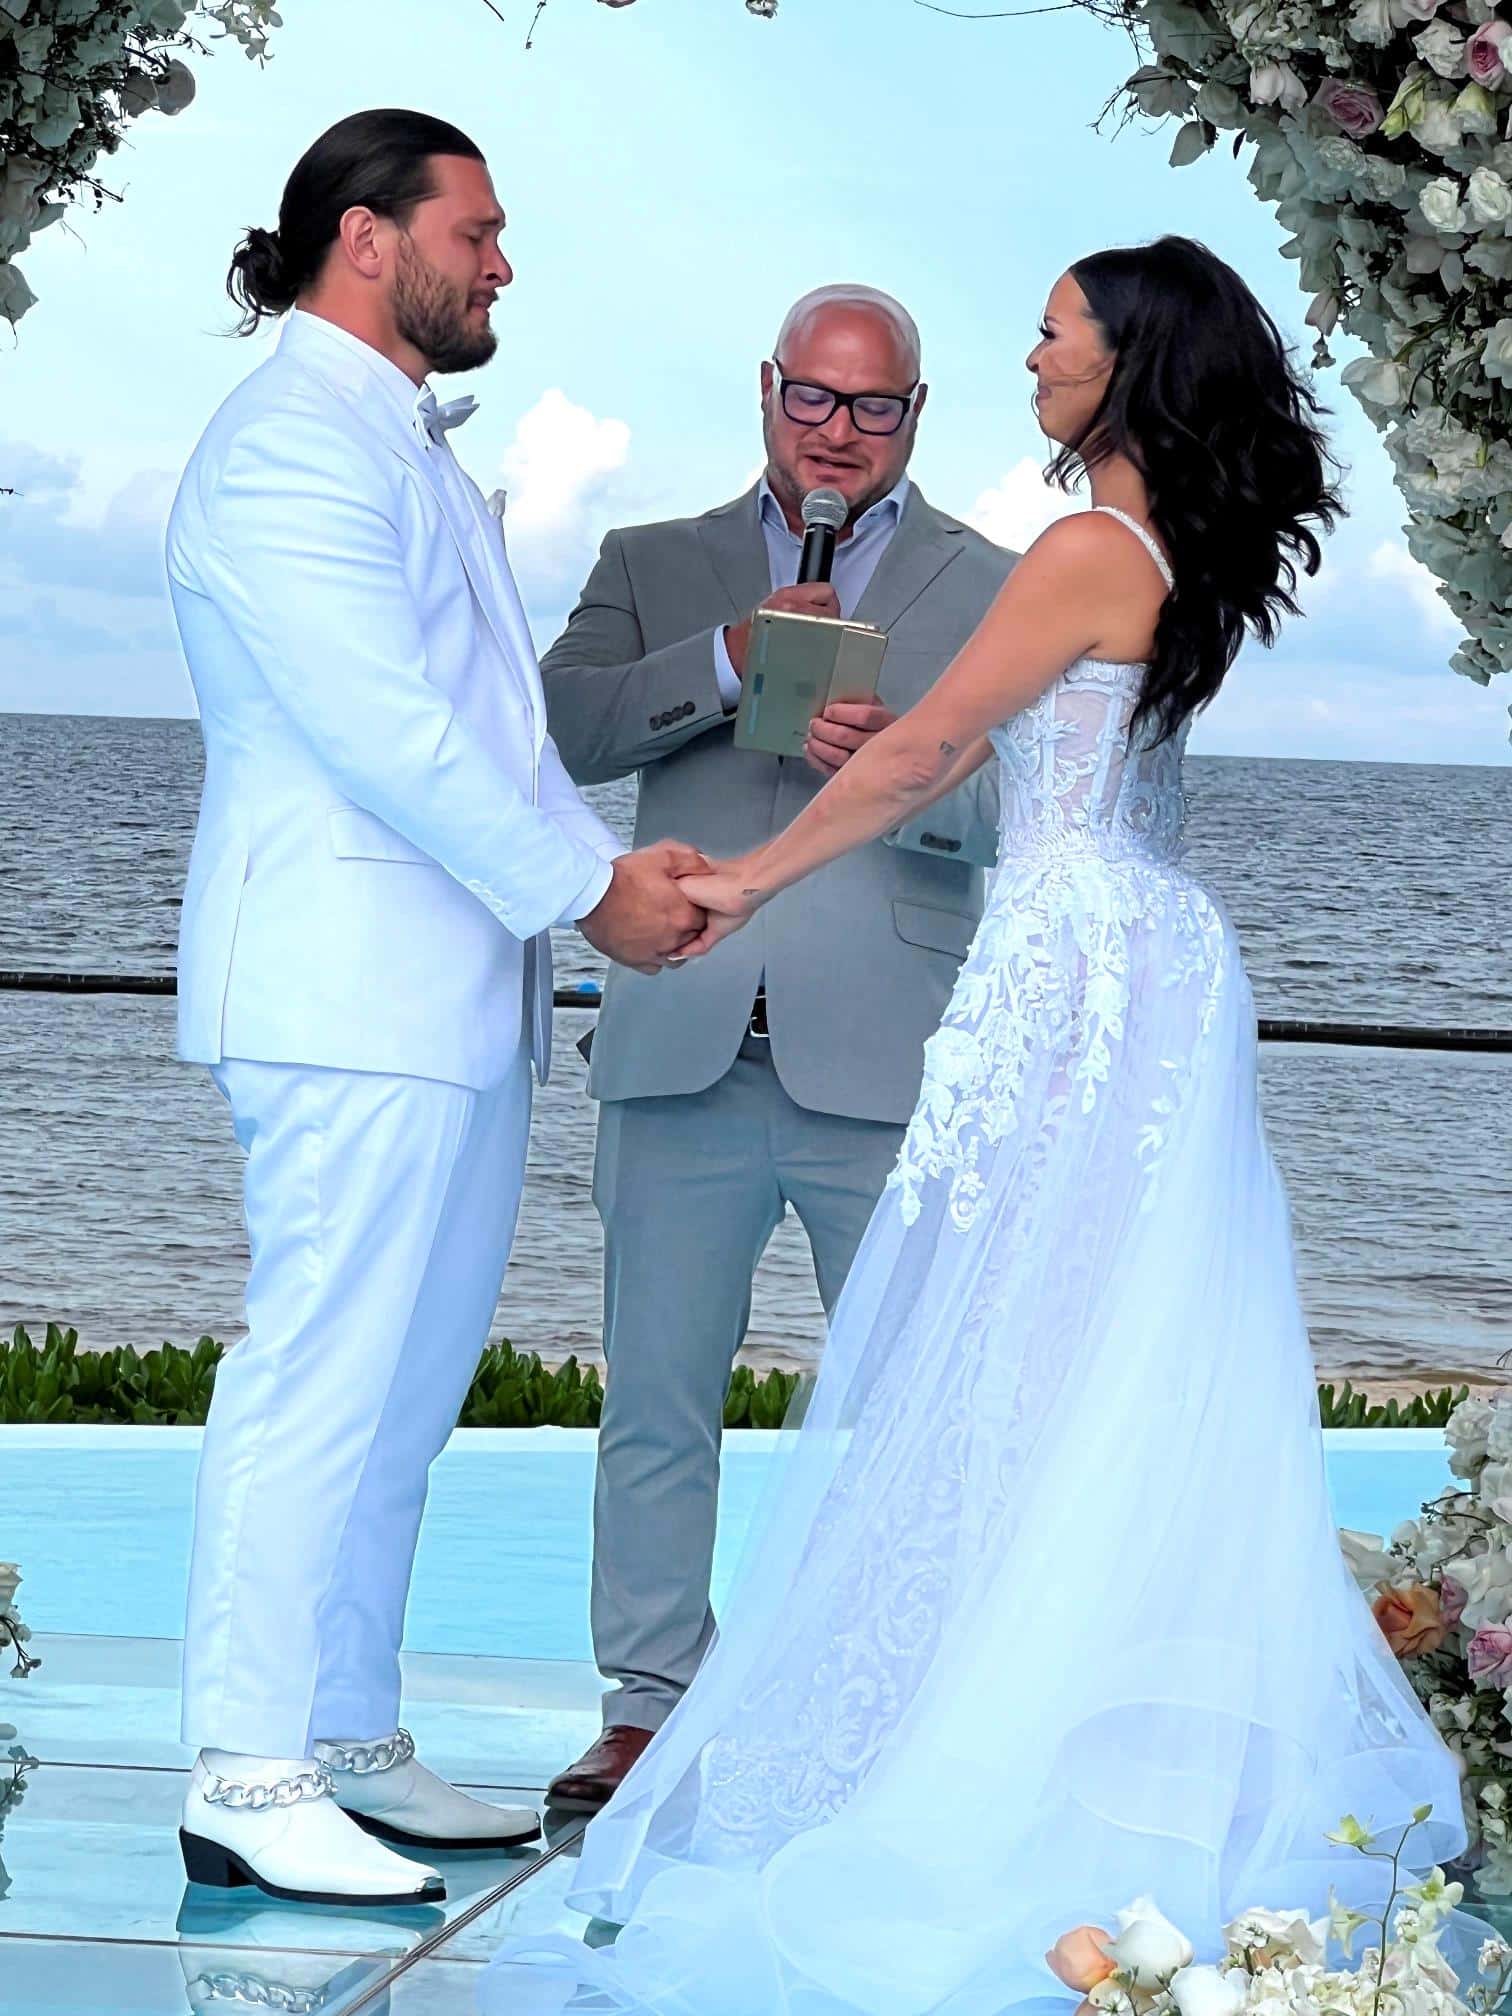 PHOTOS: Scheana Shay Marries Brock Davies in Mexico, See Vanderpump Rules Star's Dress and Guests From the Cast as Summer Serves as Her Flower Girl